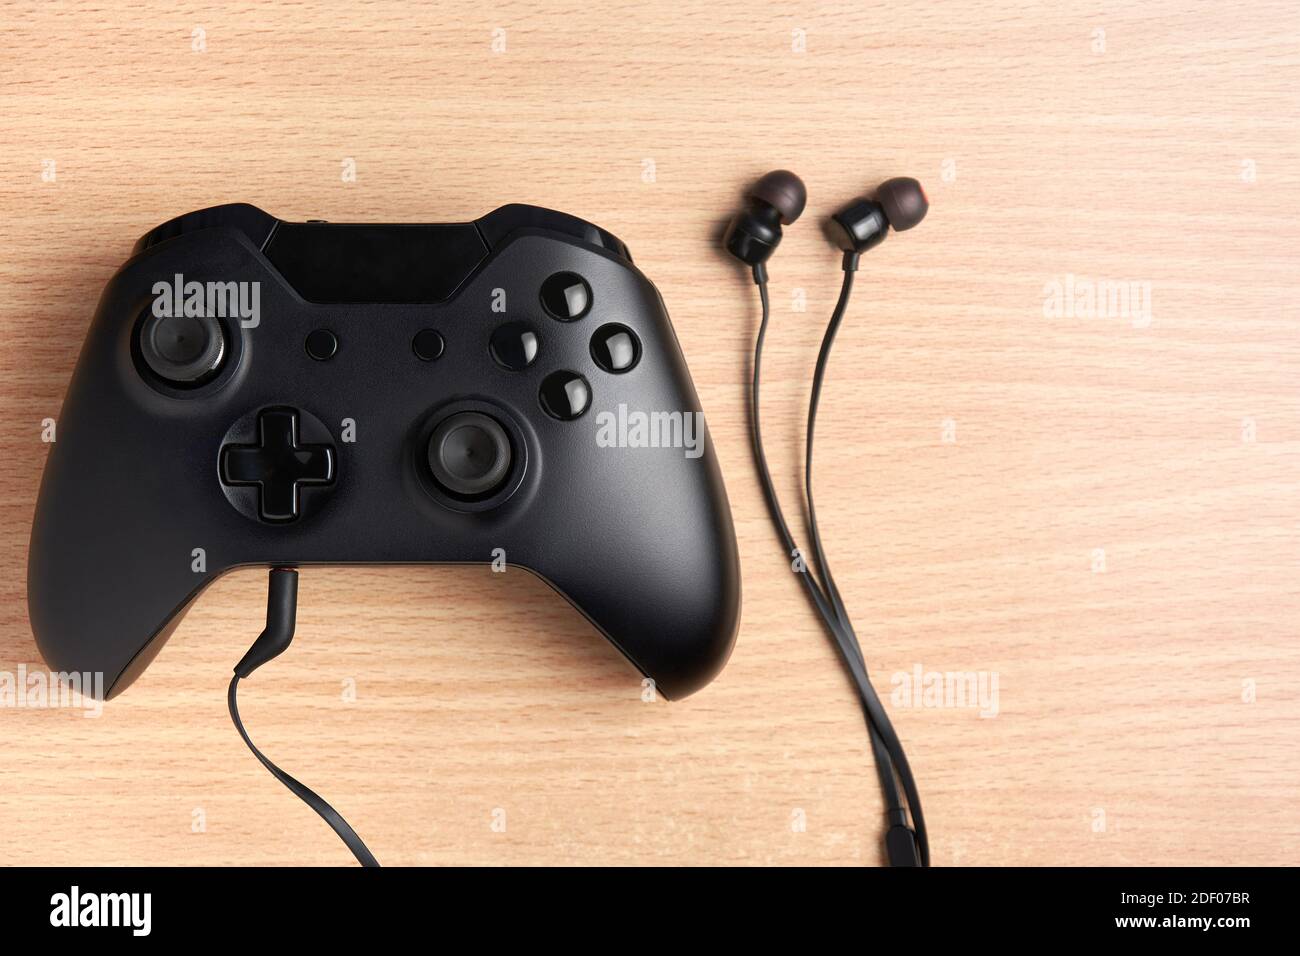 Black video game controller with earphones connected to it on wooden desktop. Stock Photo